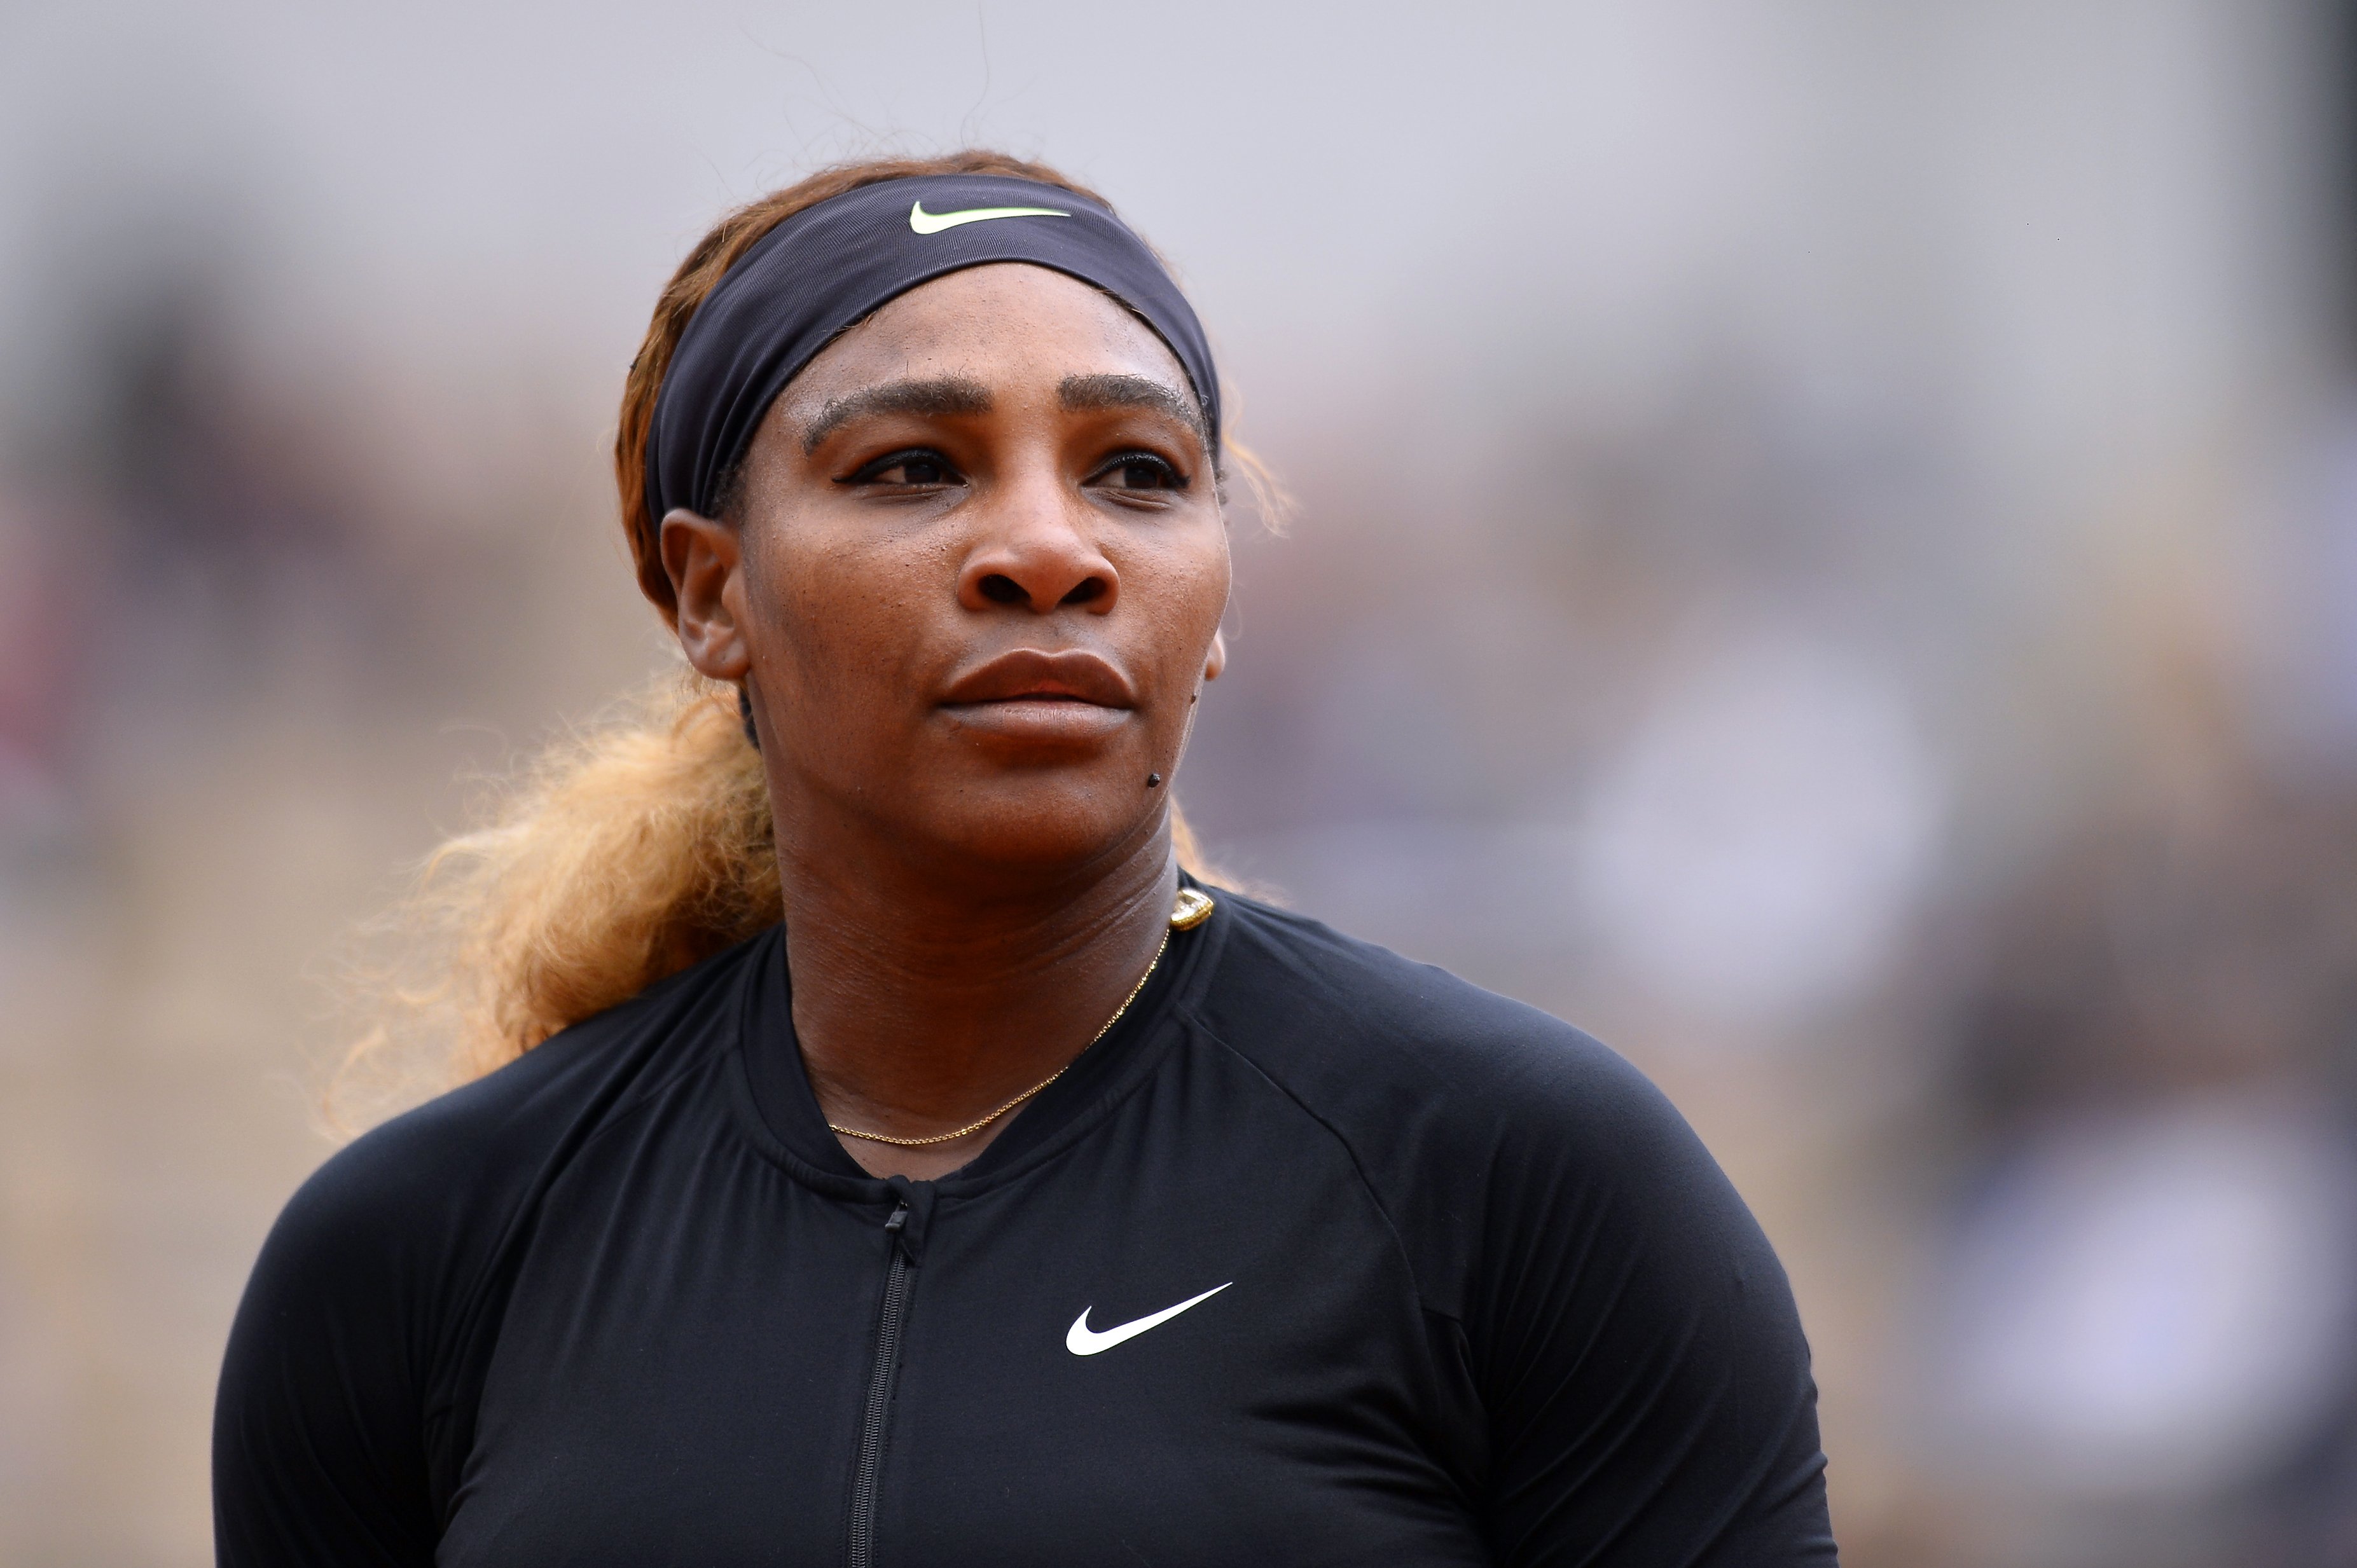 Serena Williams at the 2019 French Open at Roland Garros on May 30, 2019 | Photo: GettyImages